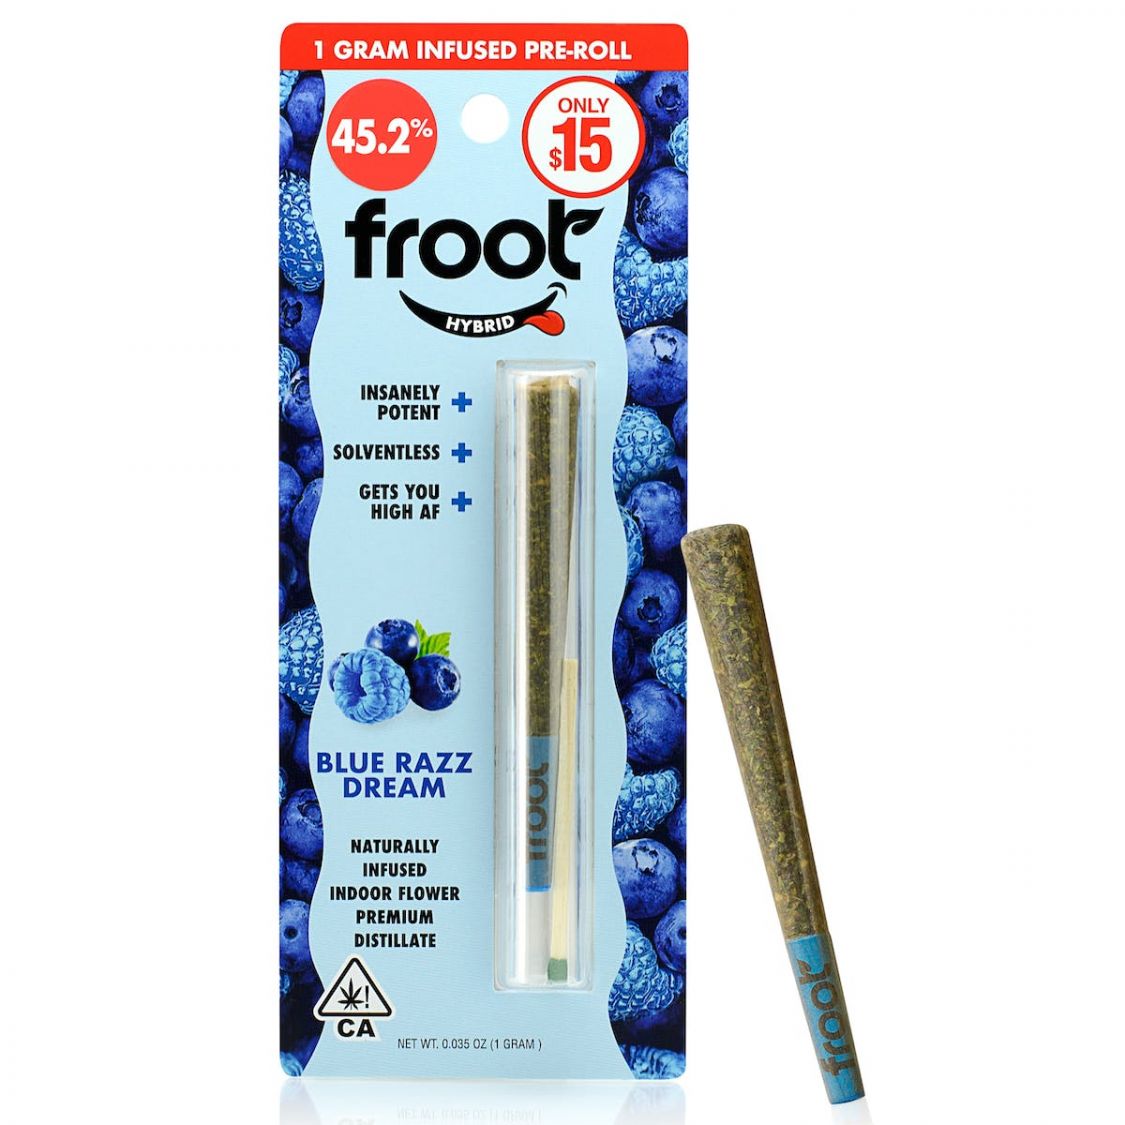 Froot Blue Razz Dream Infused Pre-Roll Pre-rolls Infused Pre-Rolls